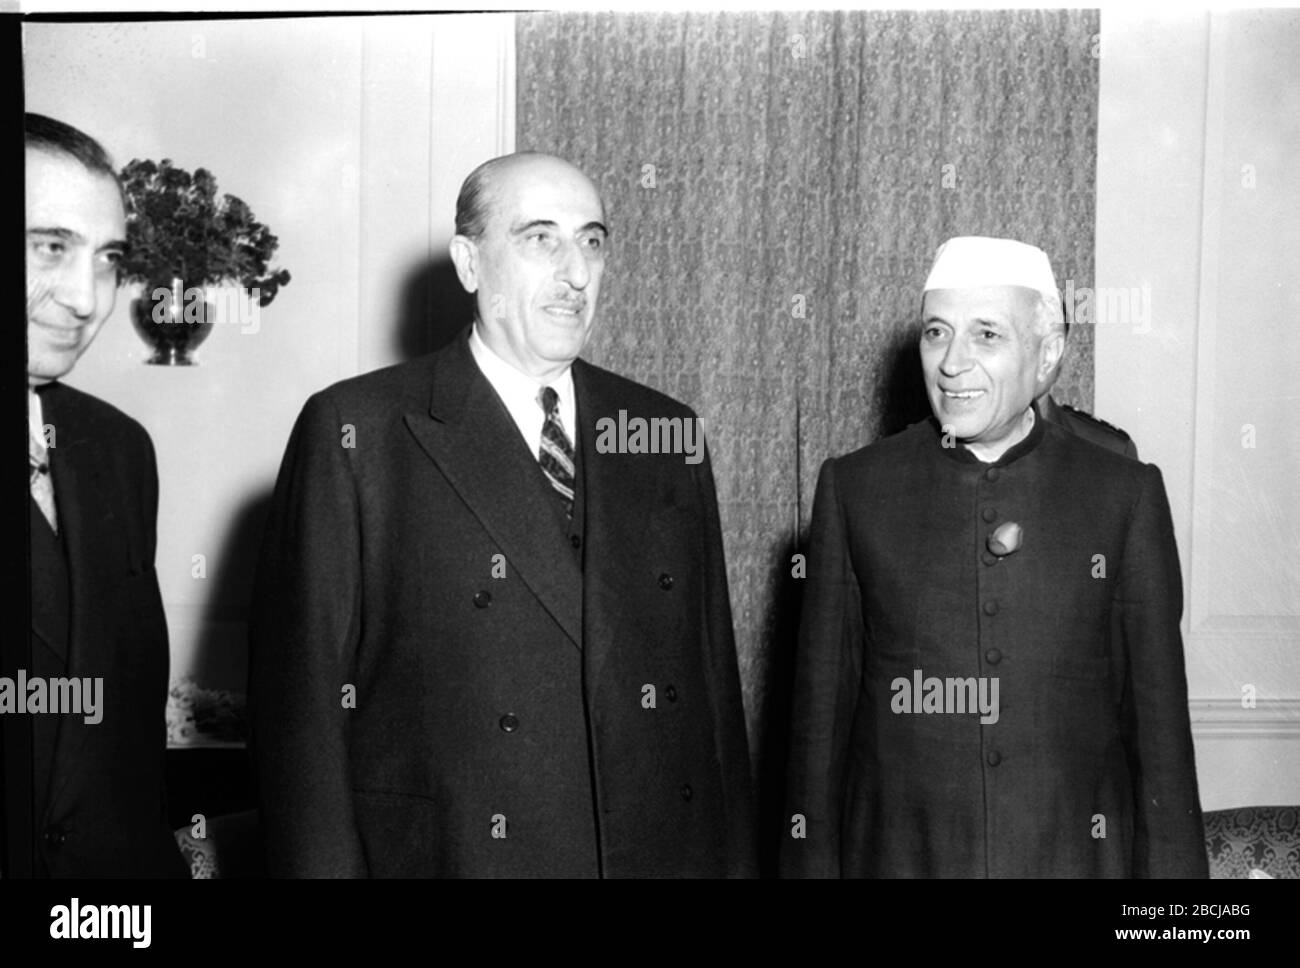 'English: Ph.Studio/January,1957,A10z H.E. Mr. Shukri Al-Kuwatly, President of Syria with the Prime Minister, Shri Jawaharlal Nehru, when the latter called on the Syrian President at R. Bhavan, New Delhi on January 17, 1957. From left to right: Syrian Foreign Minister Salah al-Bitar, Syrian President Shukri al-Quwatli, Indian Prime Minister Jawaharlal Nehru; 17 January 1957; http://photodivision.gov.in/writereaddata/webimages/thumbnails/55992.jpg; Photo Division, Ministry of Information & Broadcasting, Government of India; ' Stock Photo